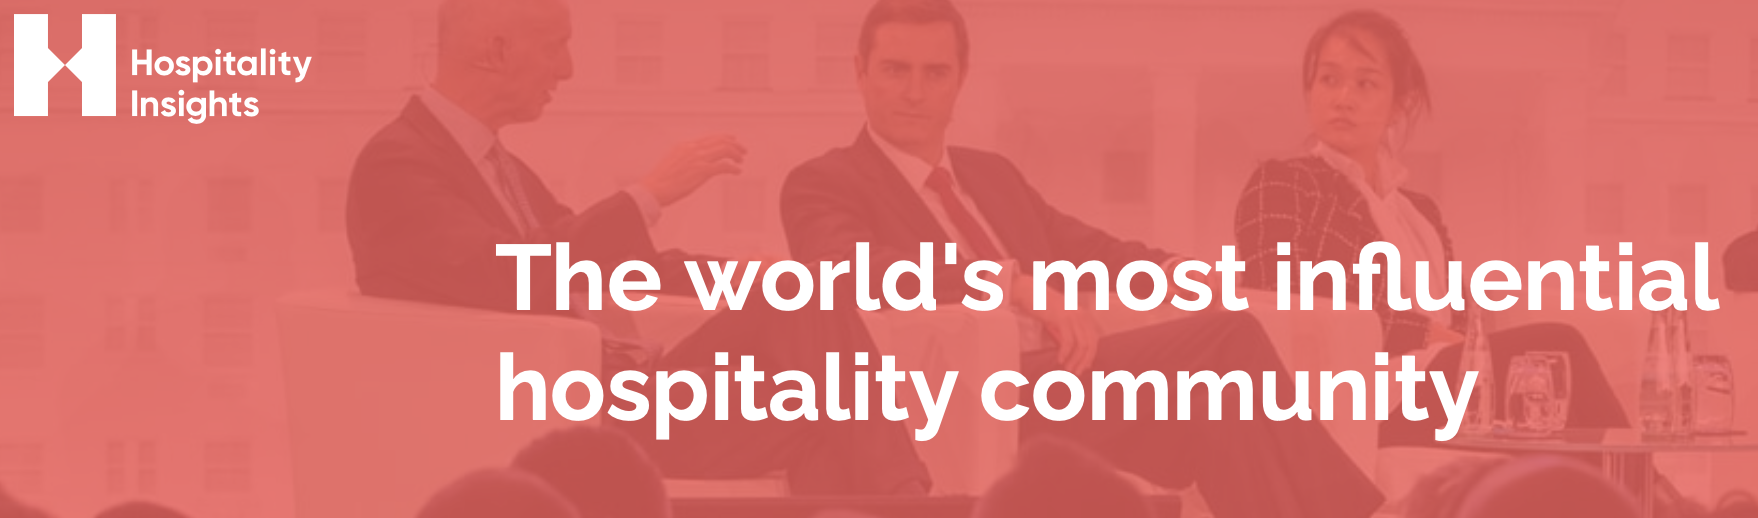 2021 Review: Hospitality Q&As, Hospitality Insights